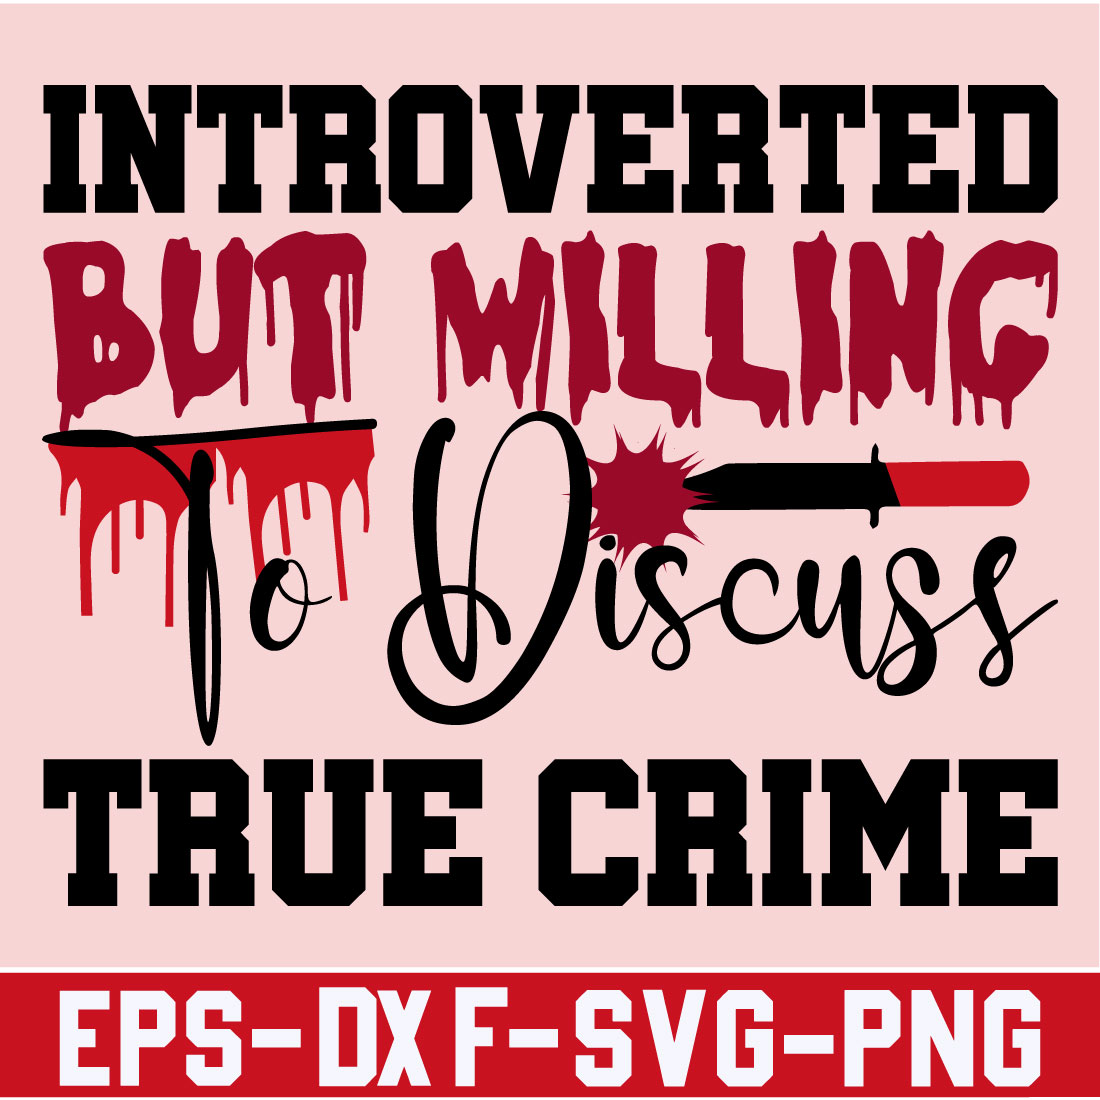 Introverted but willing to discuss True Crime preview image.